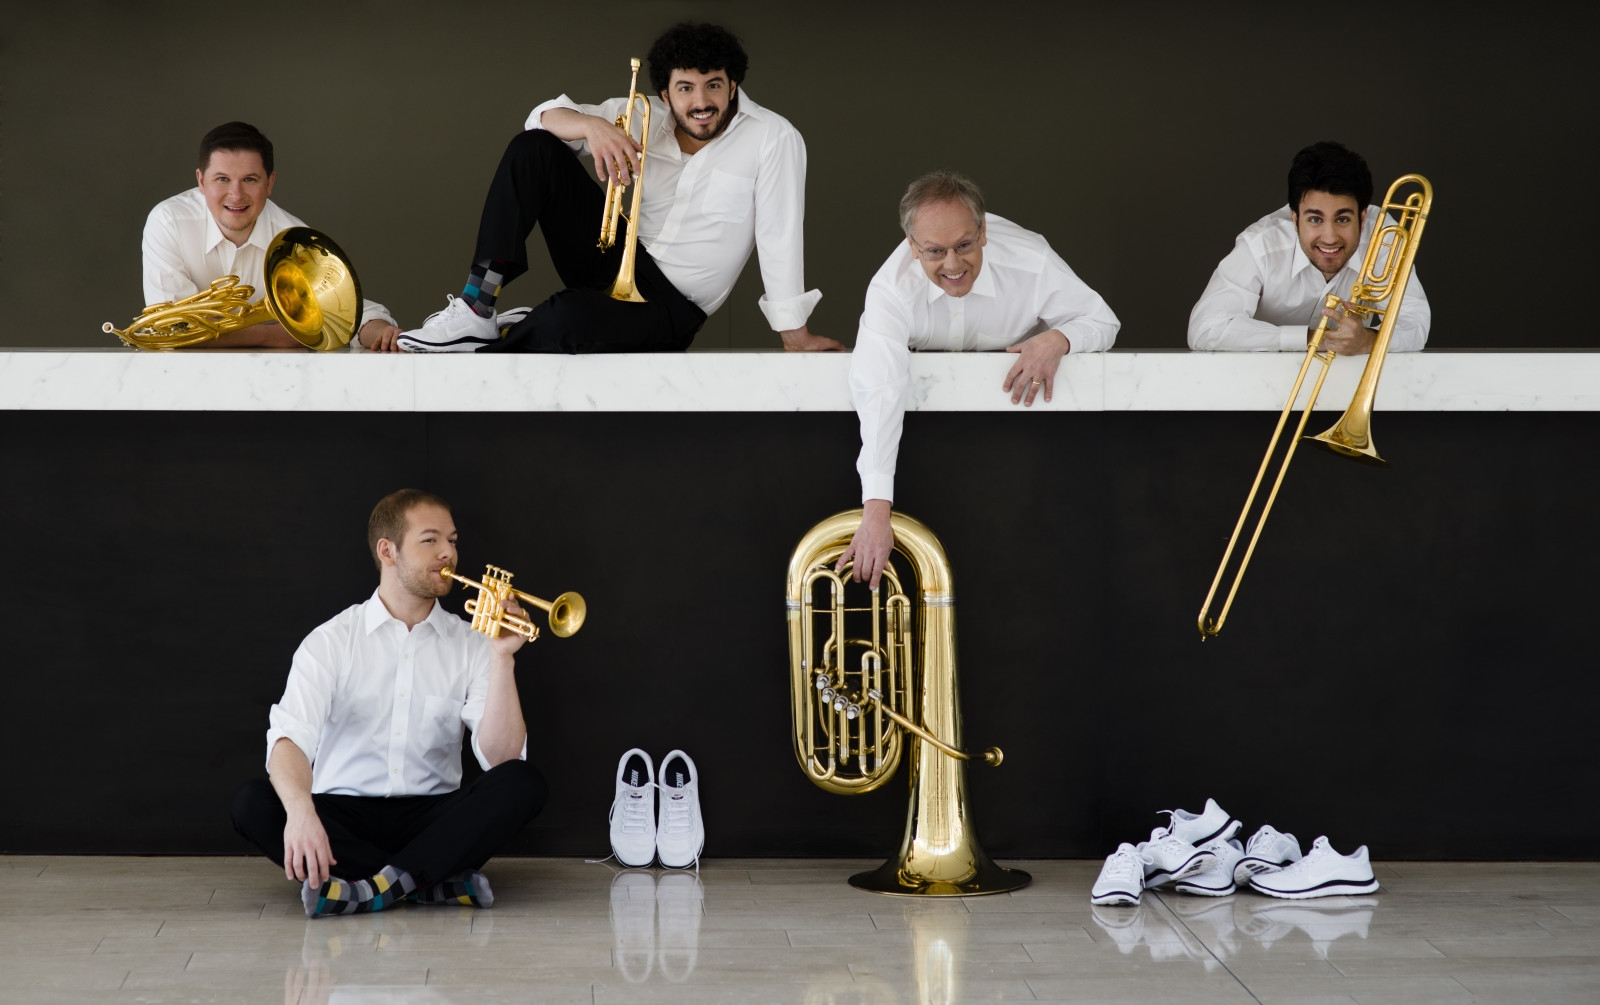 Review: Canadian Brass provided a delightful, impressive night of music and fun